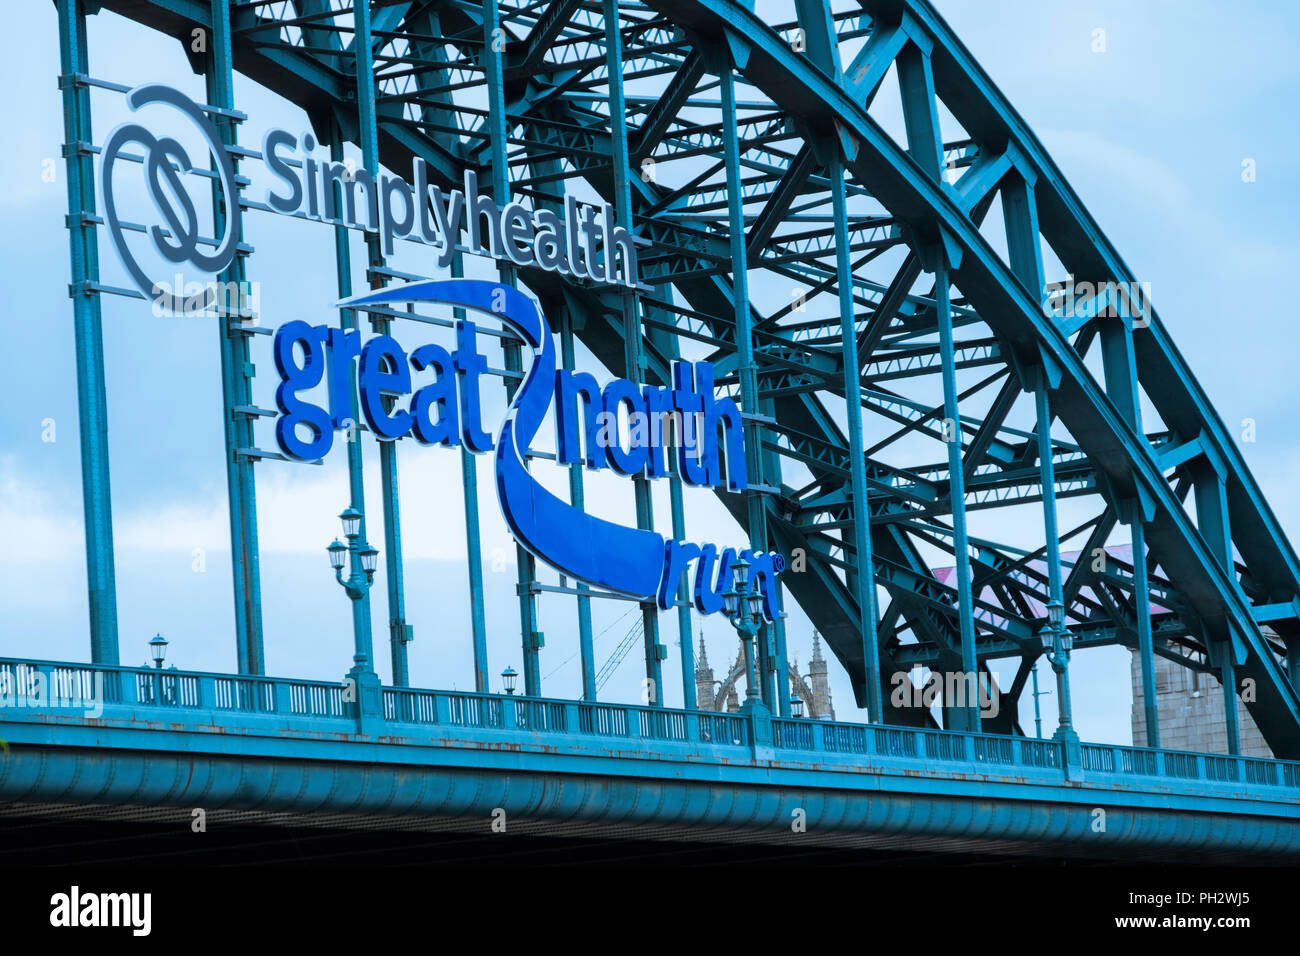 The Tyne Bridge carrying an advert for the Great North Run. Stock Photo